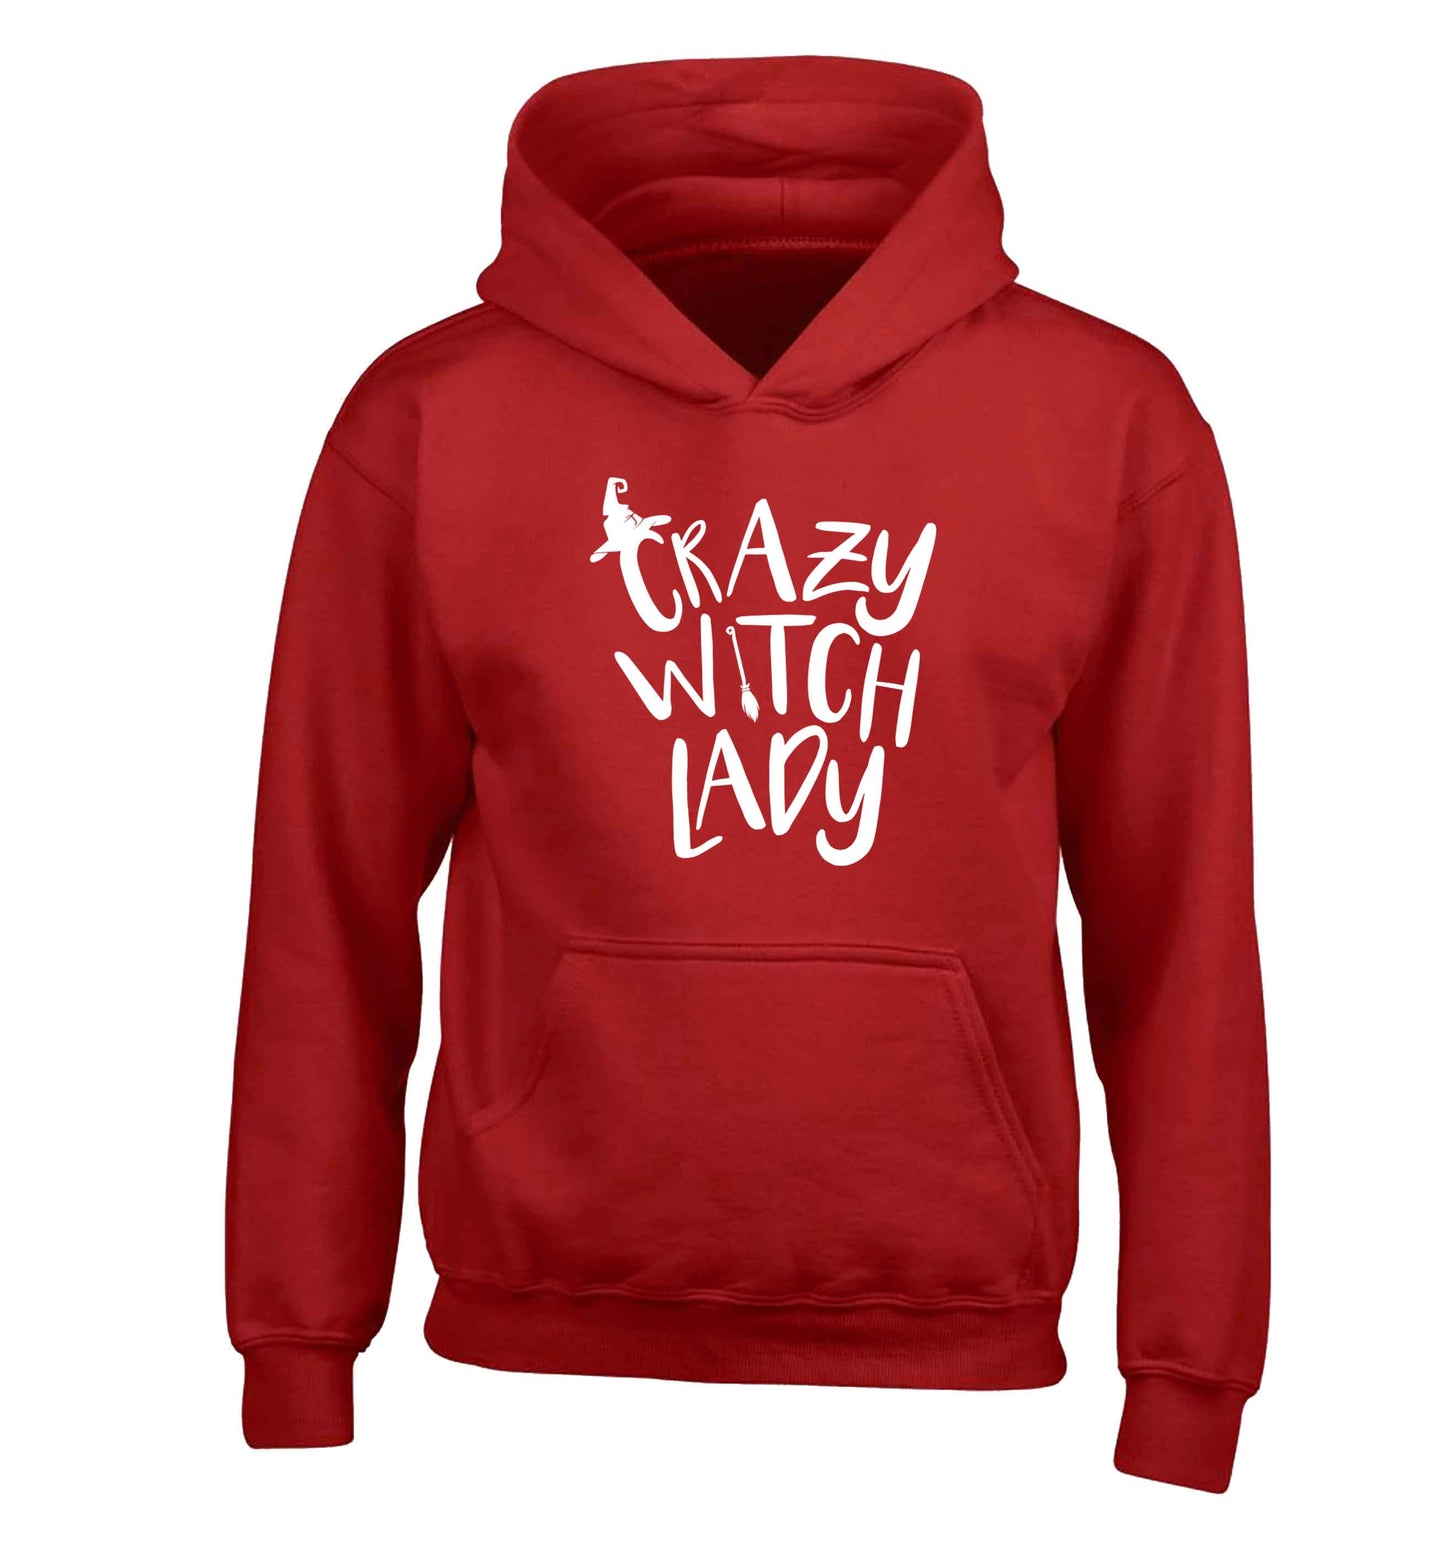 Crazy witch lady children's red hoodie 12-13 Years